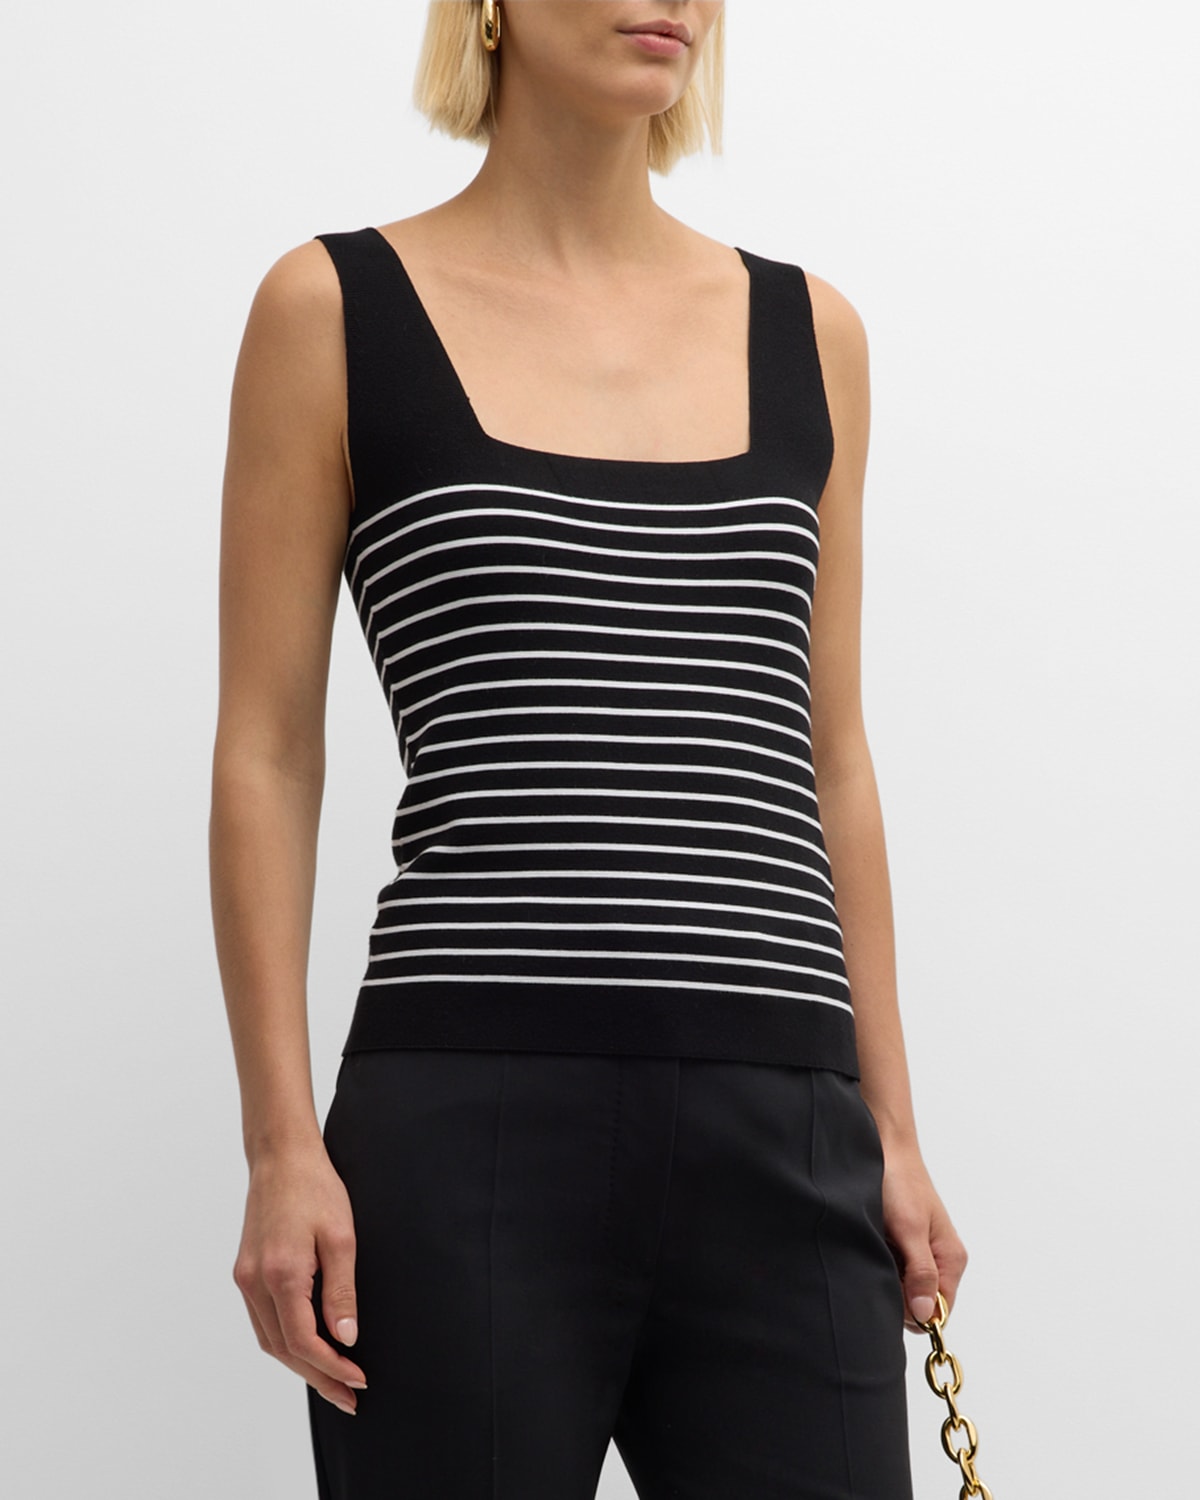 The Ellie Striped Square-Neck Sweater Tank